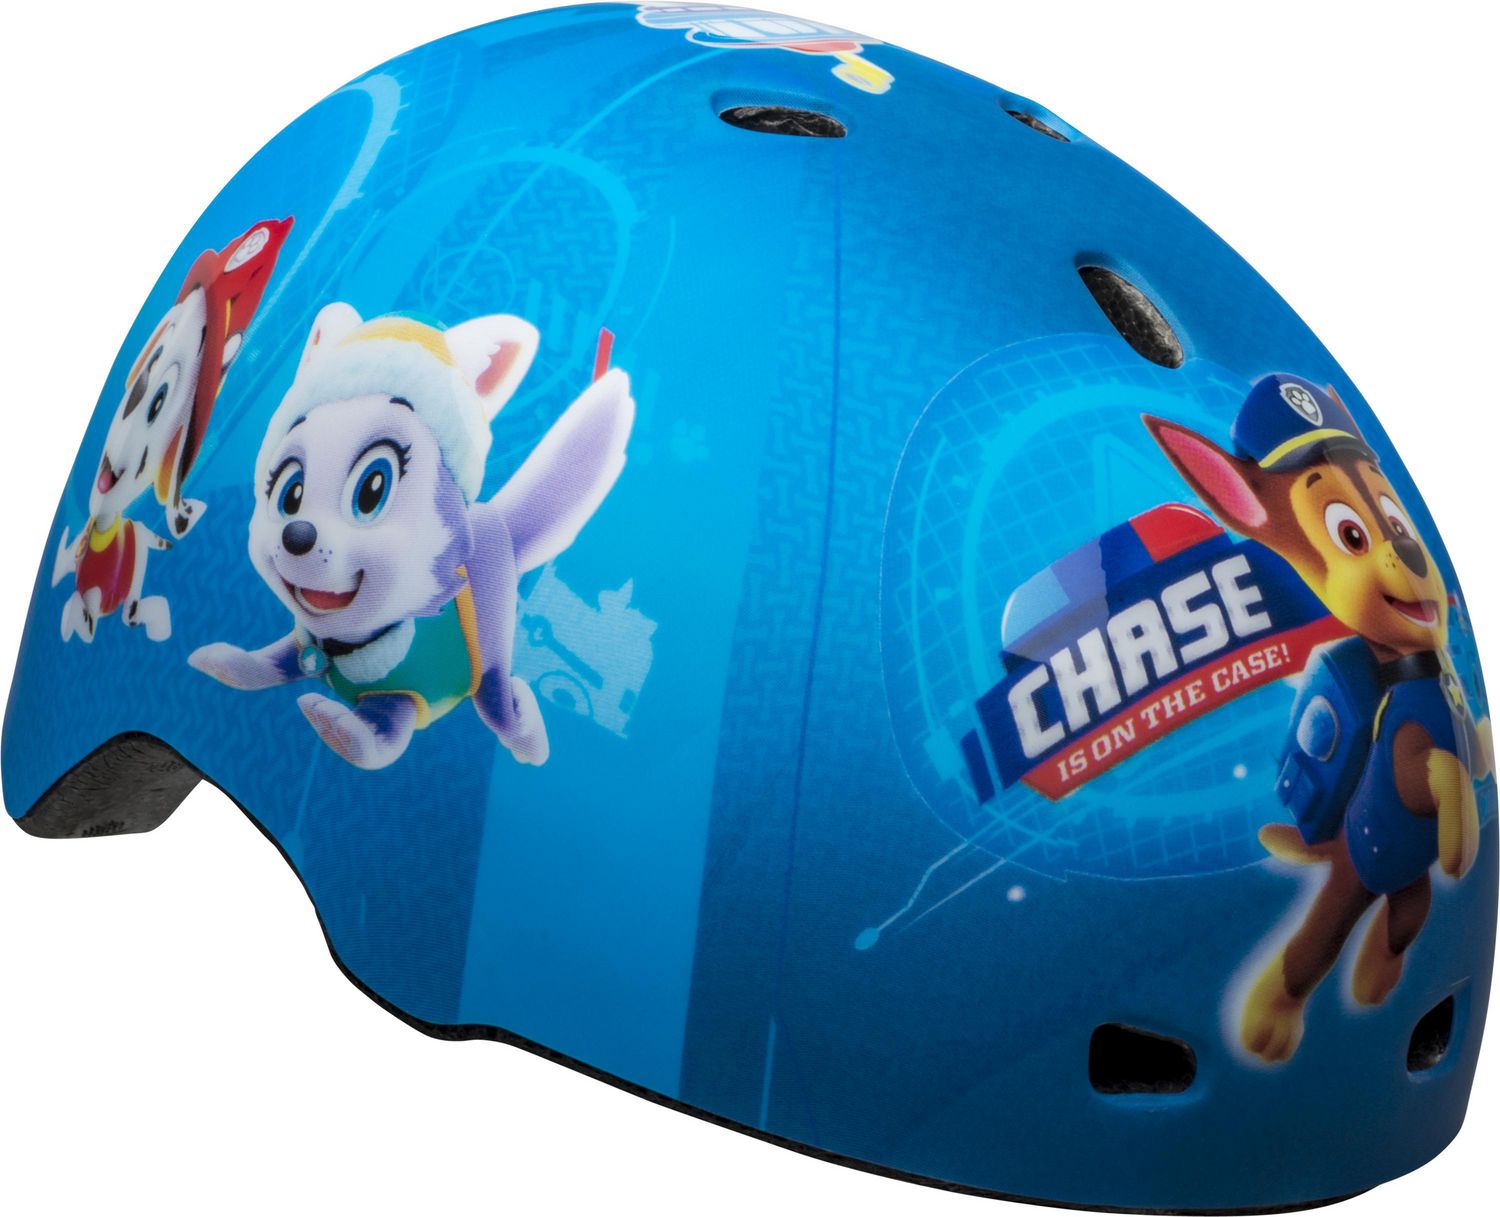 paw patrol scooter and helmet